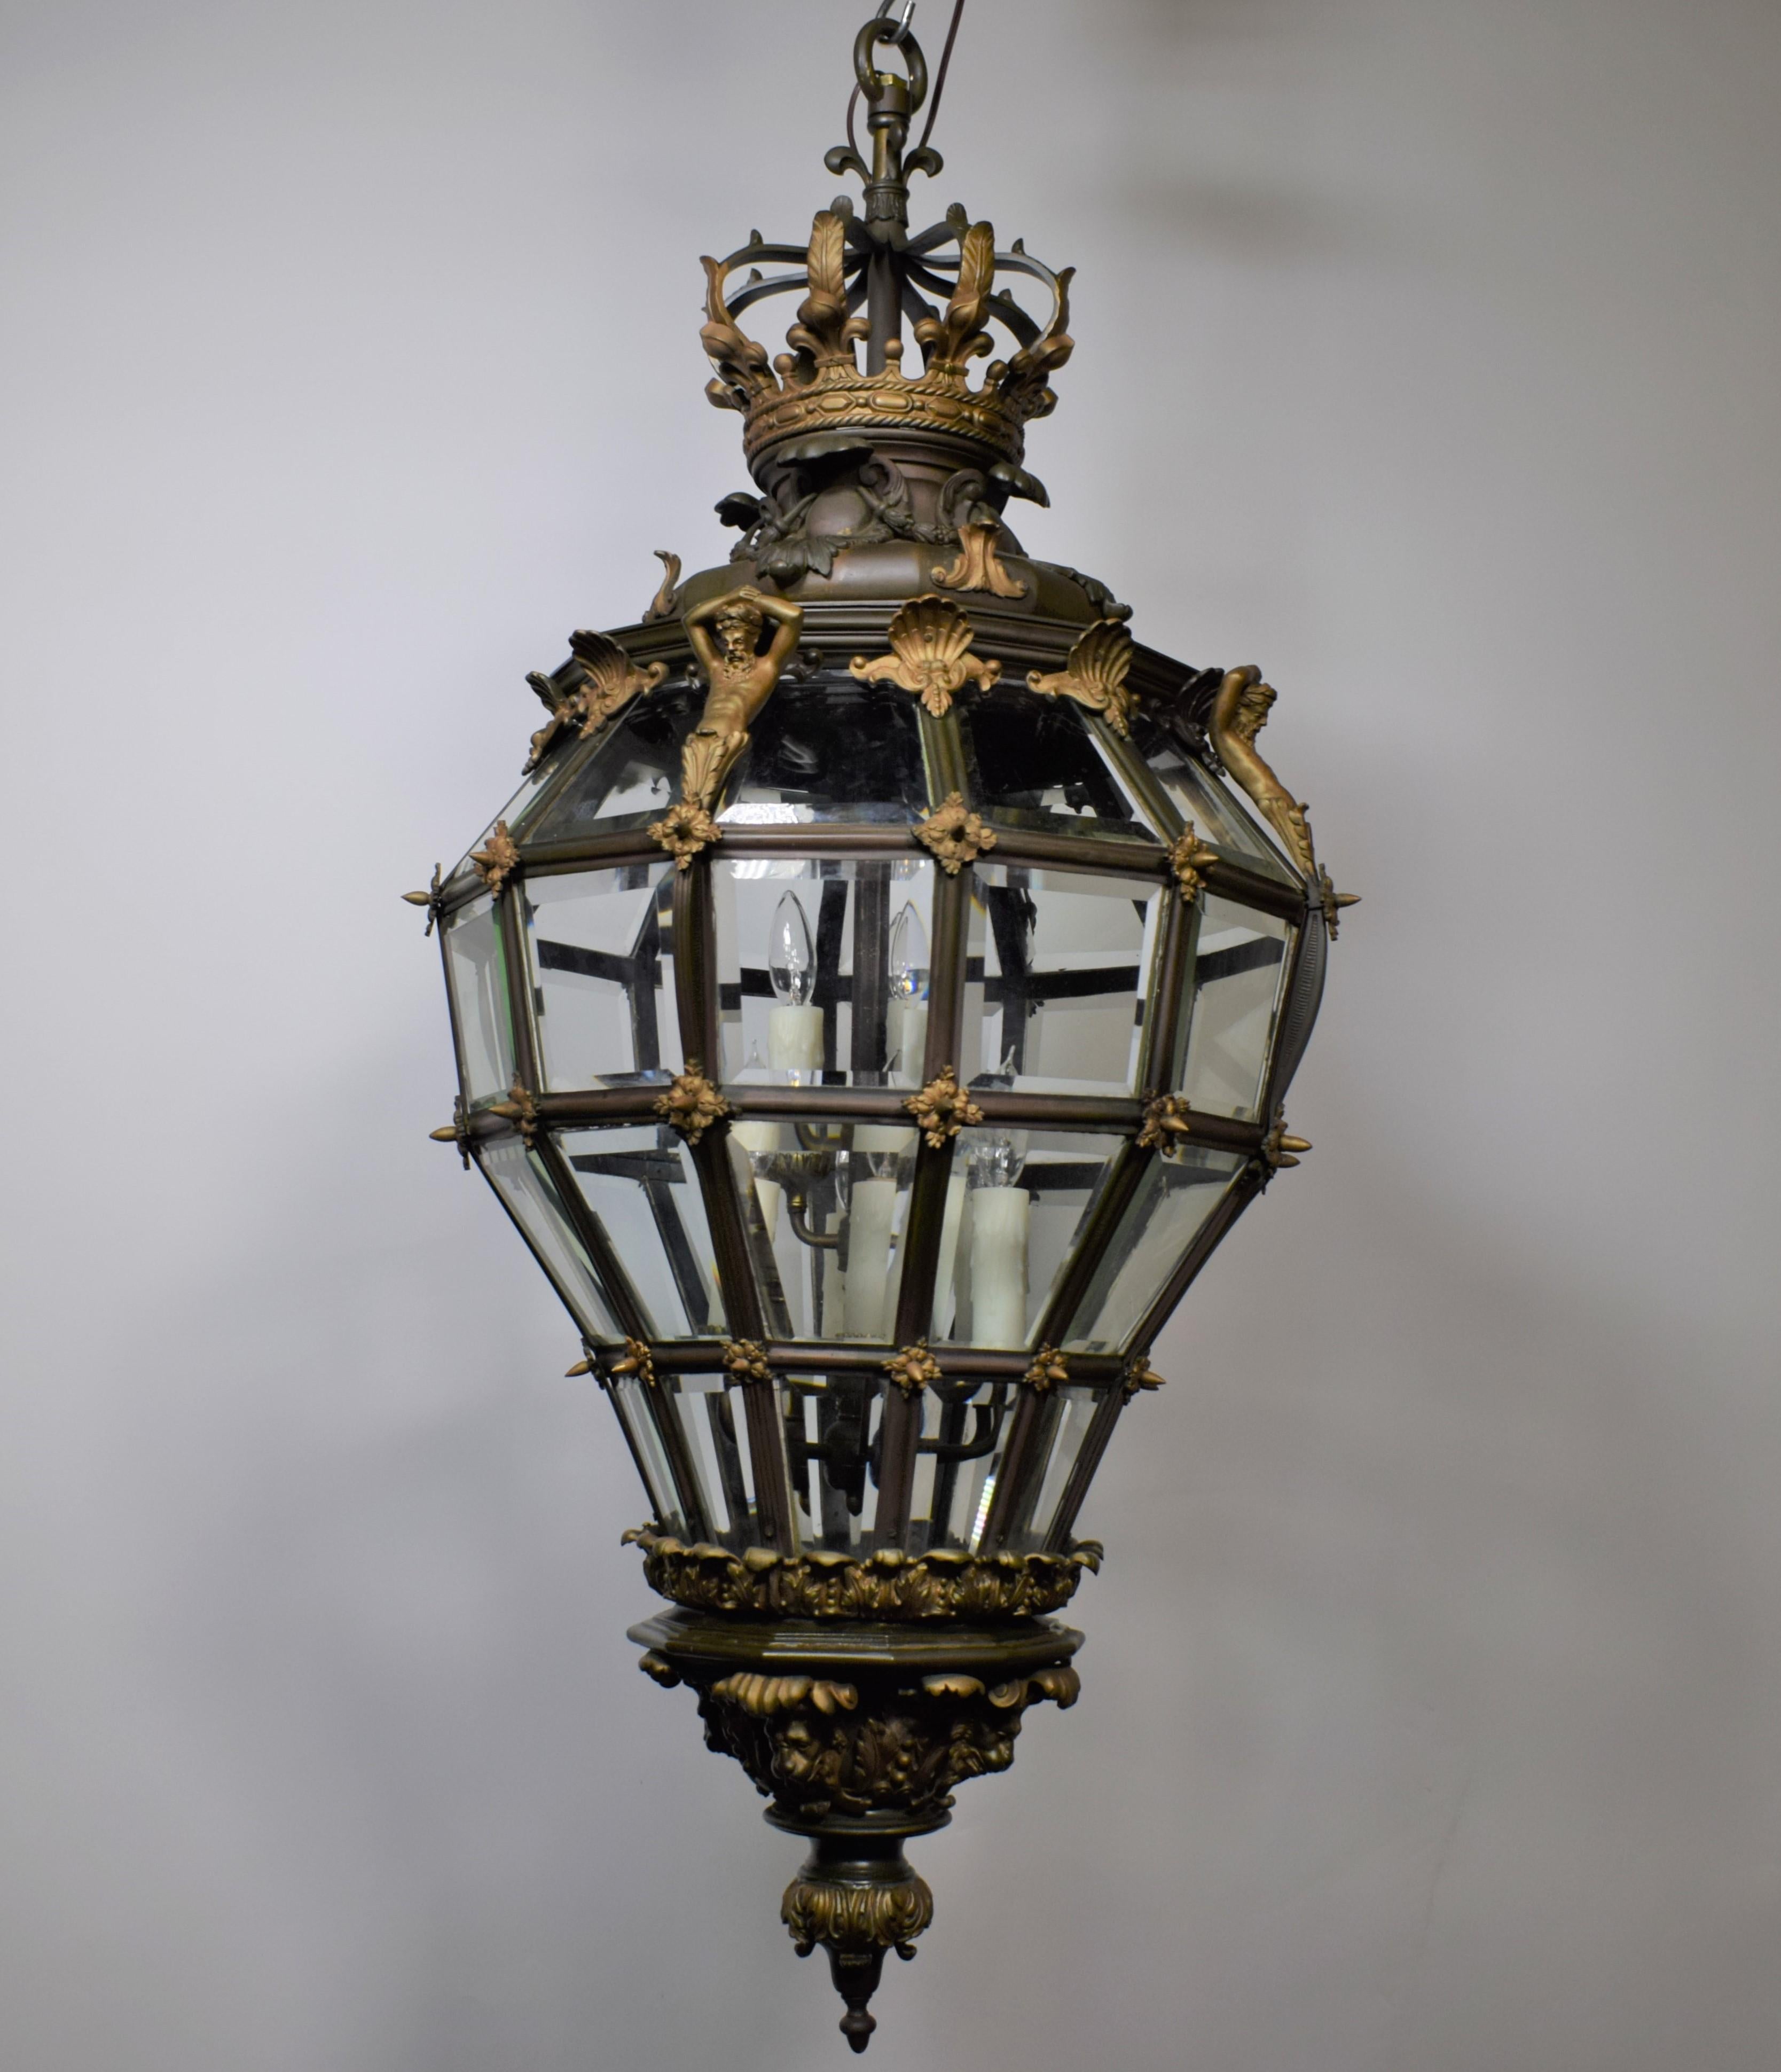 A very fine bronze & gilt bronze Versailles style lantern featuring beveled crystal panels. France, circa 1900
Louis XVI Versailles style nine light lantern apparently unmarked. Measures: Approx. H. 51